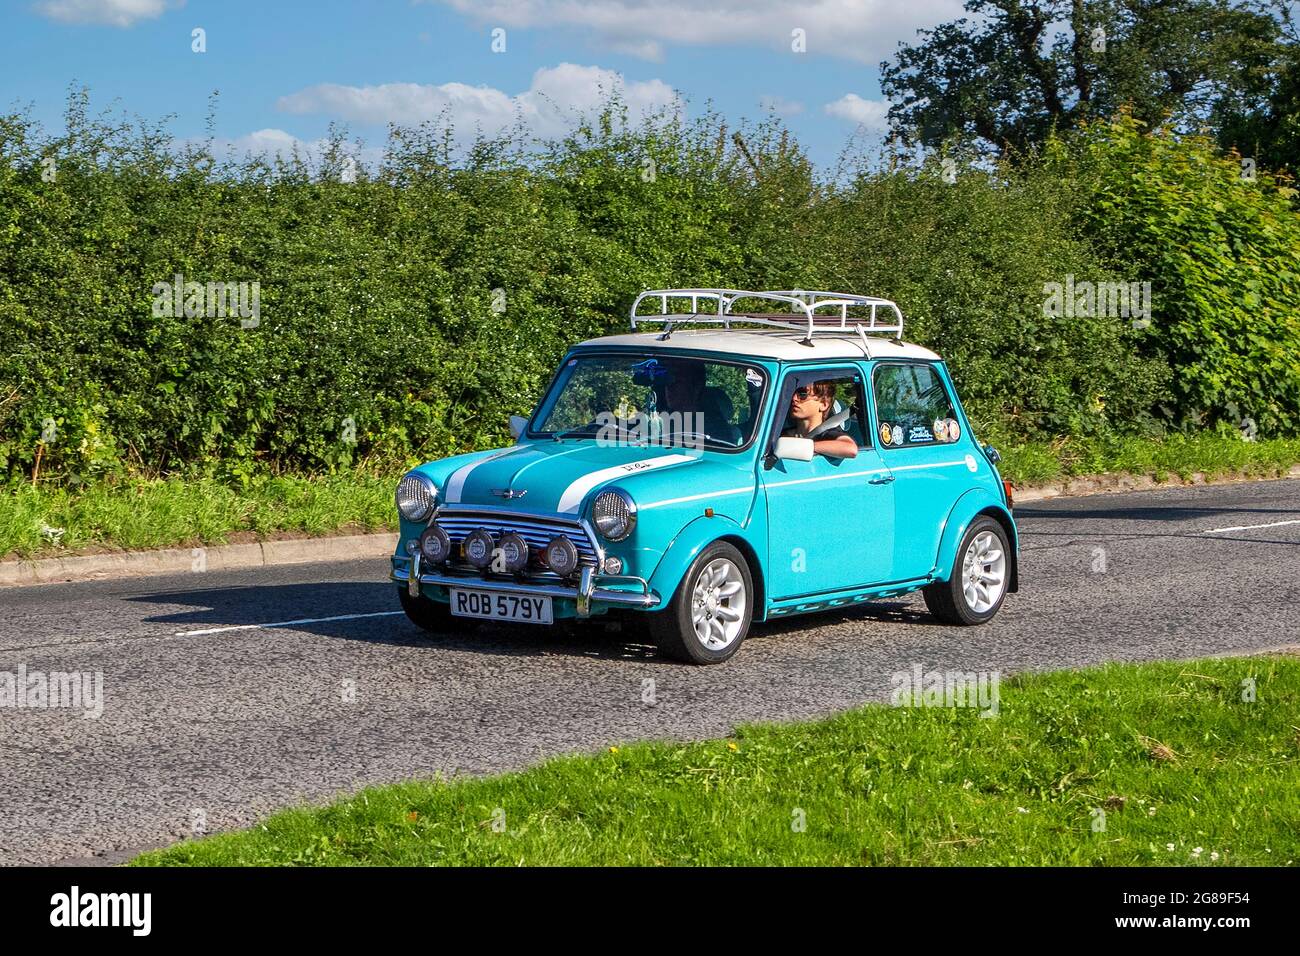 1999 90s Rover blue white Mini-Cooper 1275 cc saloon vehicles en-route to Capesthorne Hall classic July car show, Cheshire, UK Stock Photo